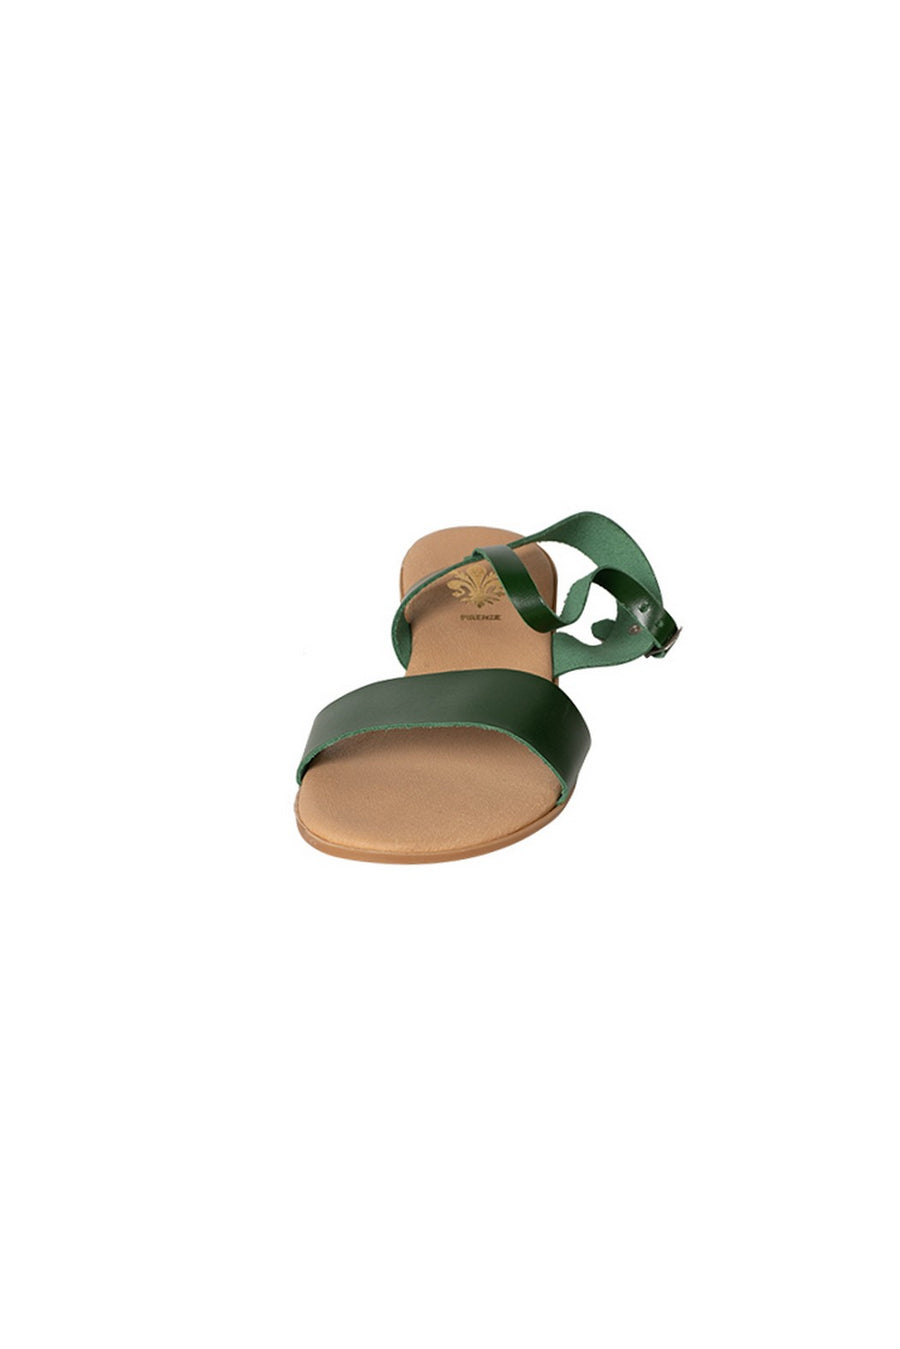 Italian leather bottle green casual sandal with ankle strap